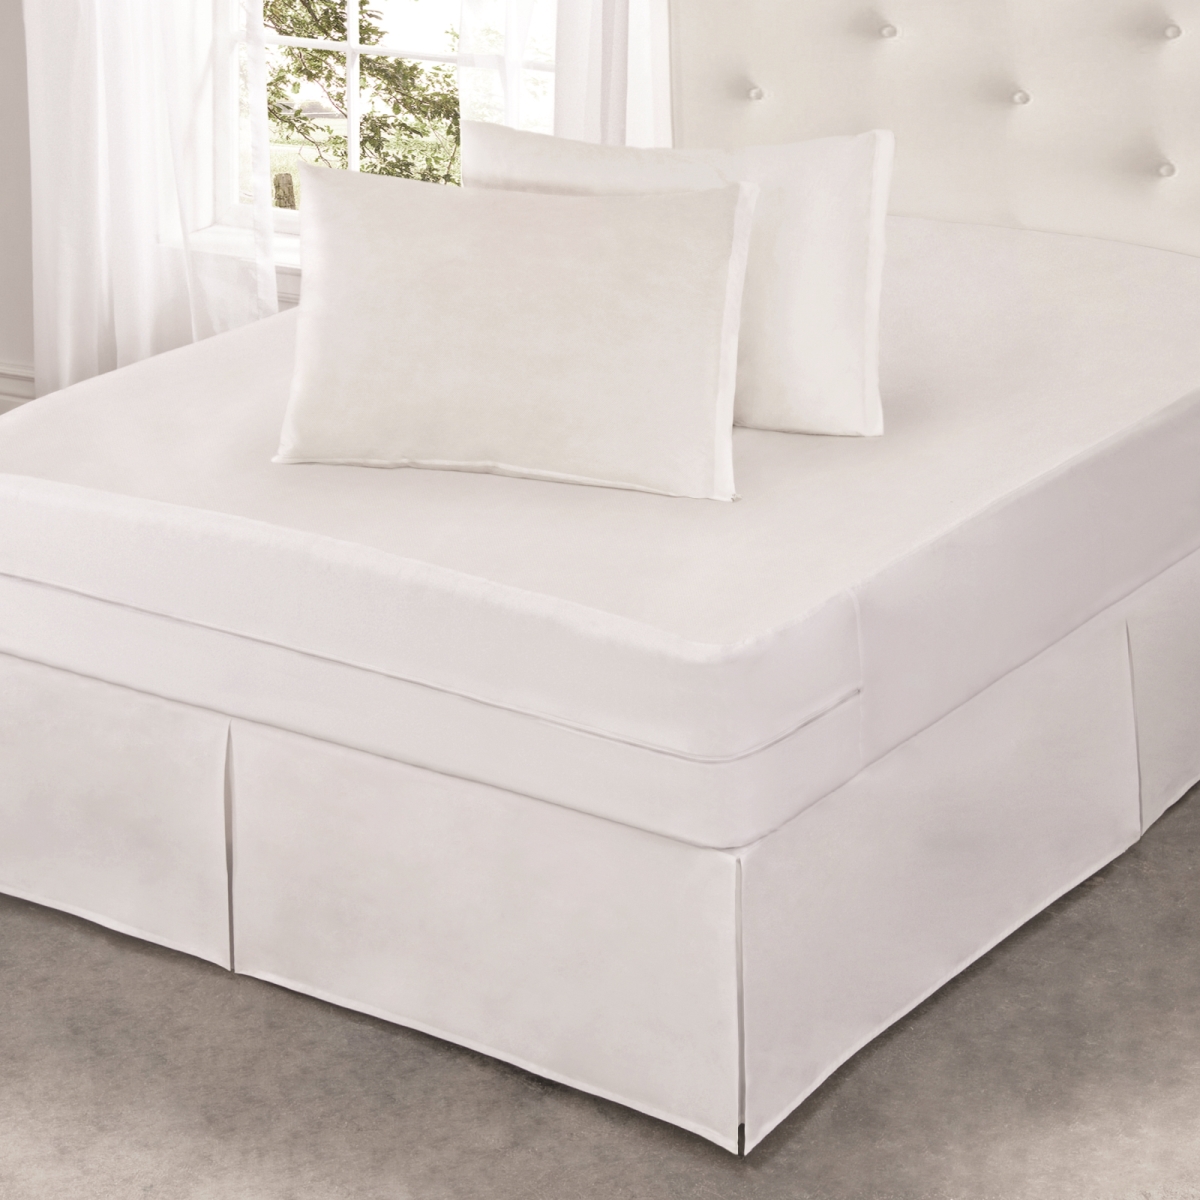 All166xxwhit04 Easy Care Mattress Protector With Bed Bug Blocker, White - King Size